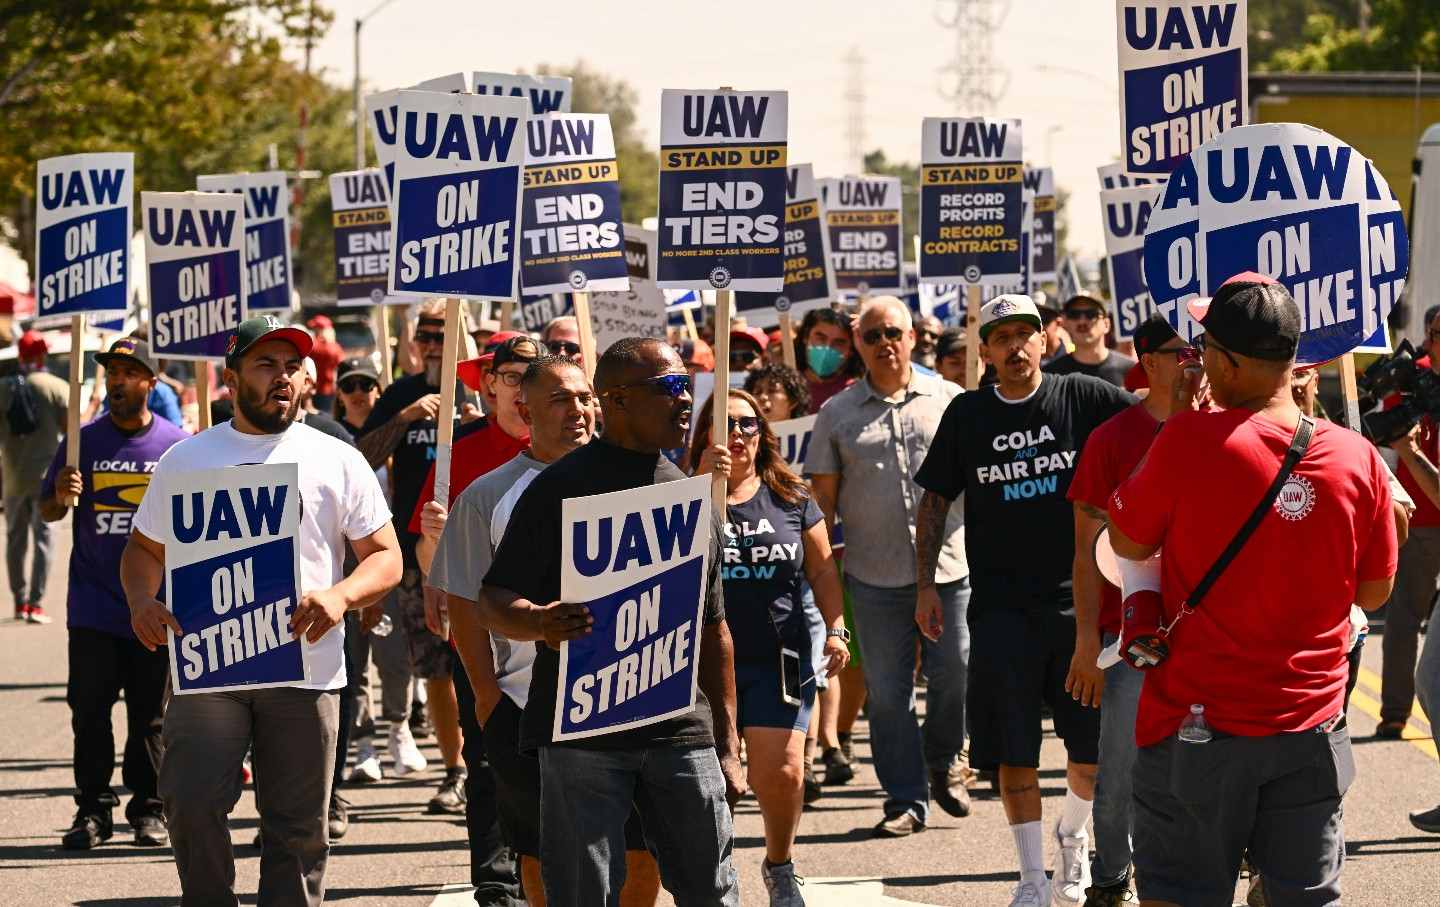 Members of the United Auto Workers Local 230 walk the picket line in front of the Chrysler Corporate Parts Division in Ontario, California, on September 26.